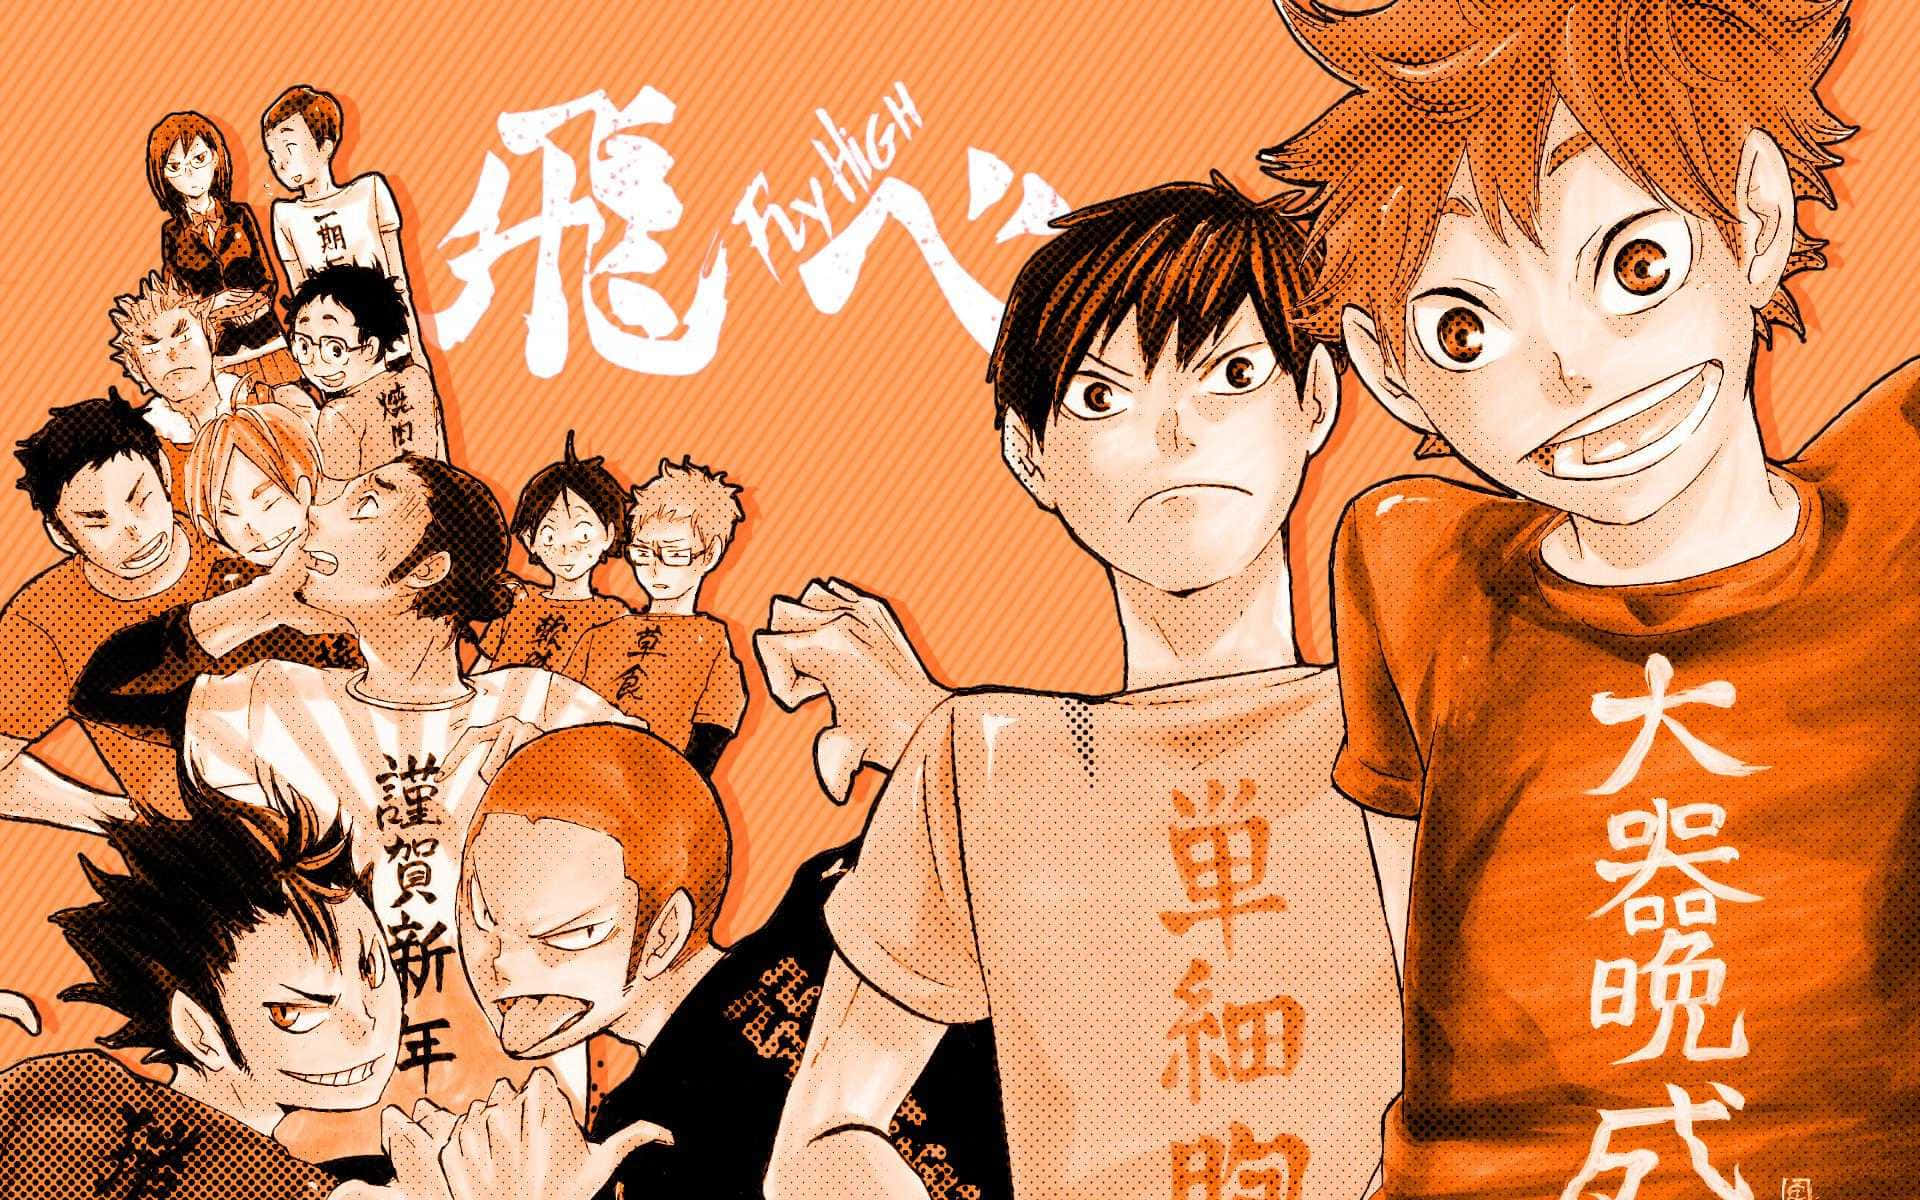 Enjoy a feeling of victory with this vibrant desktop inspired by the Haikyuu anime. Wallpaper